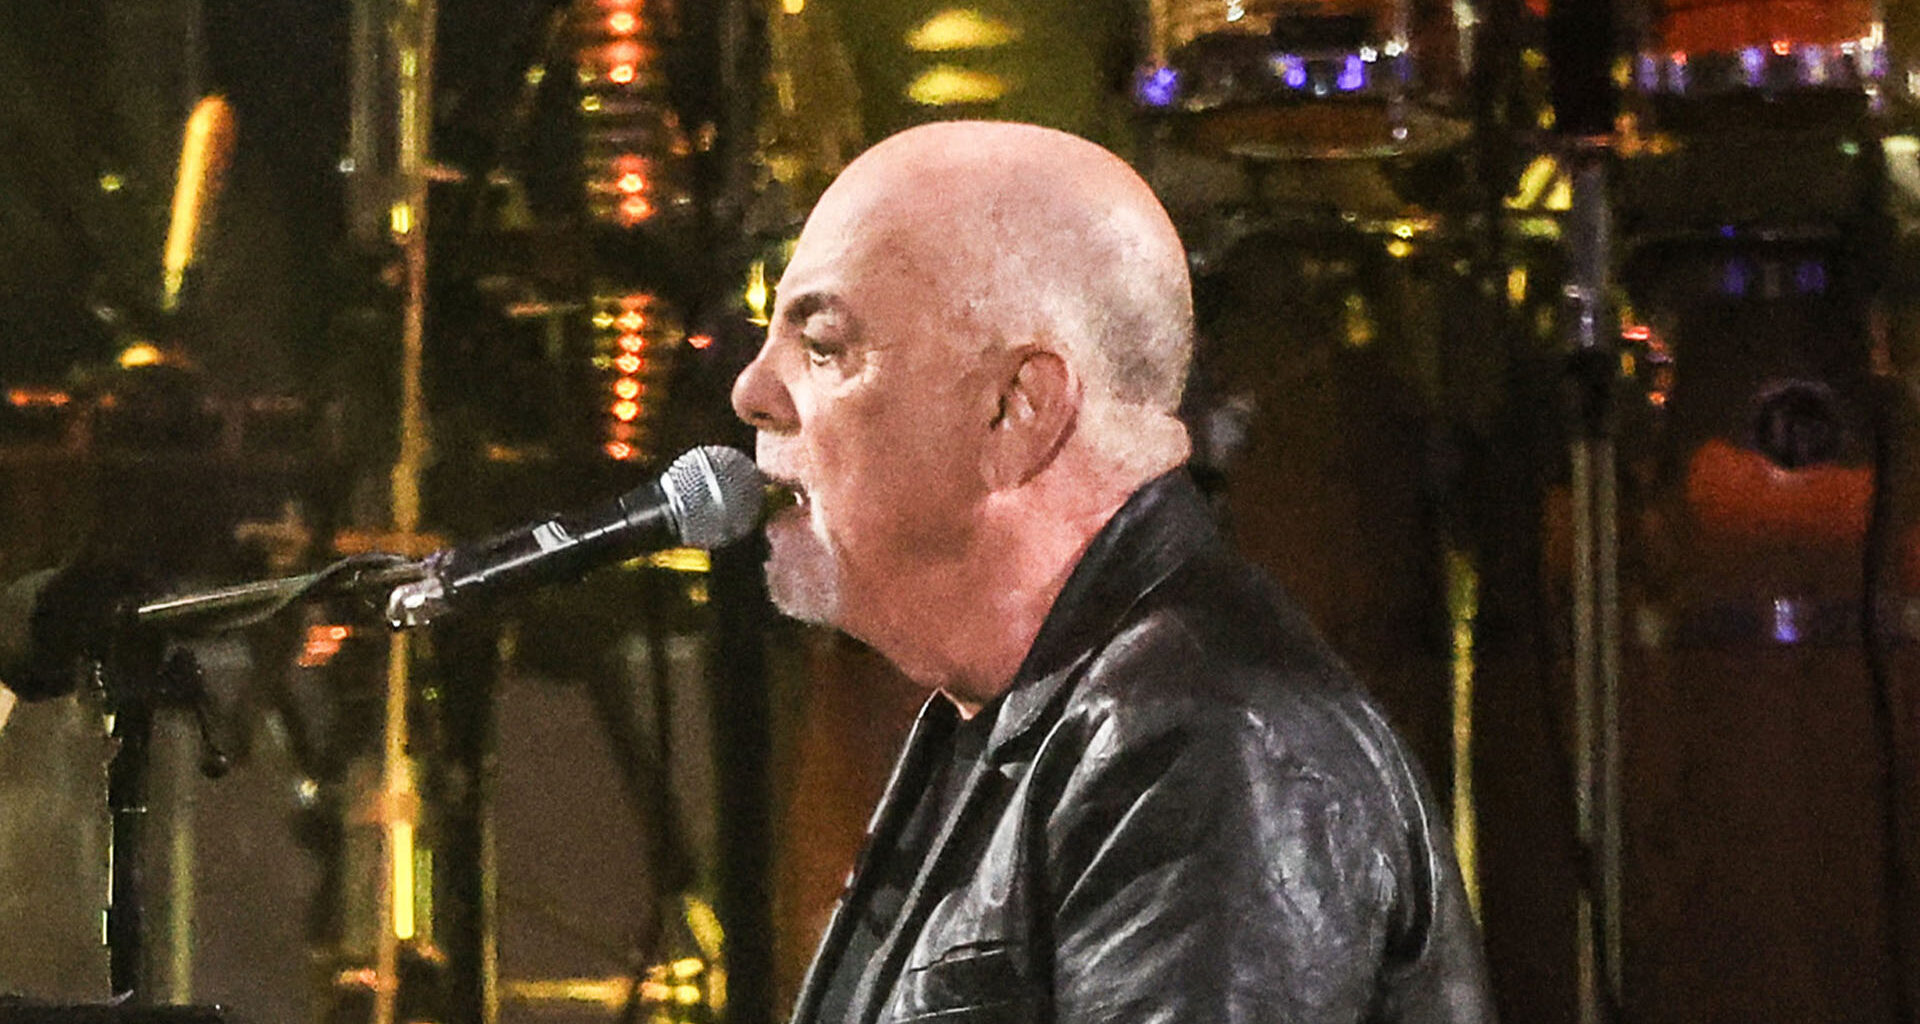 Billy Joel sings iconic song Uptown Girl to ex-wife Christie Brinkley at MSG concert as fans praise the ‘GOAT’ singer